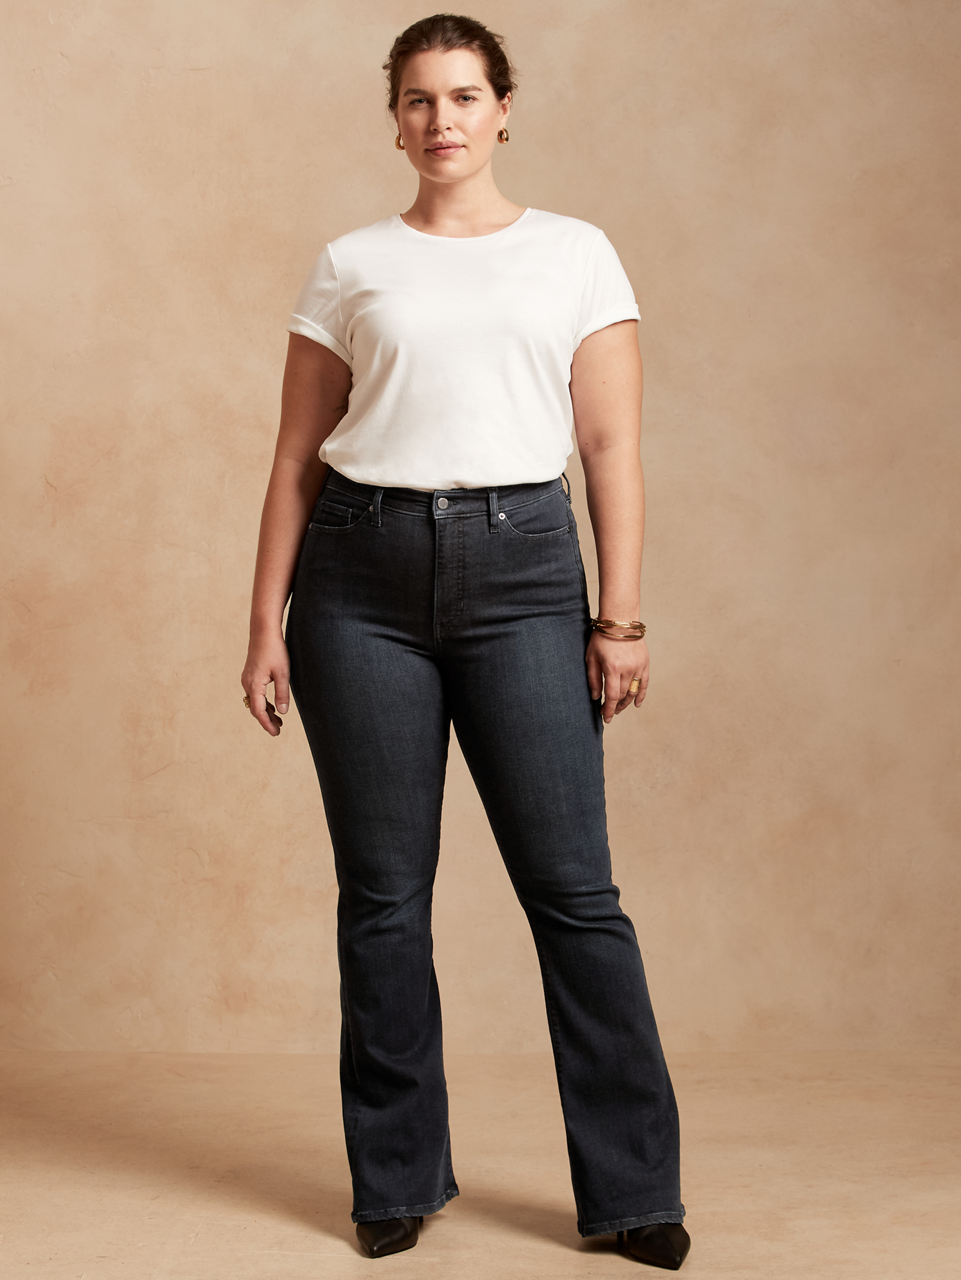 A model wearing a pair of black jeans from Banana Republic